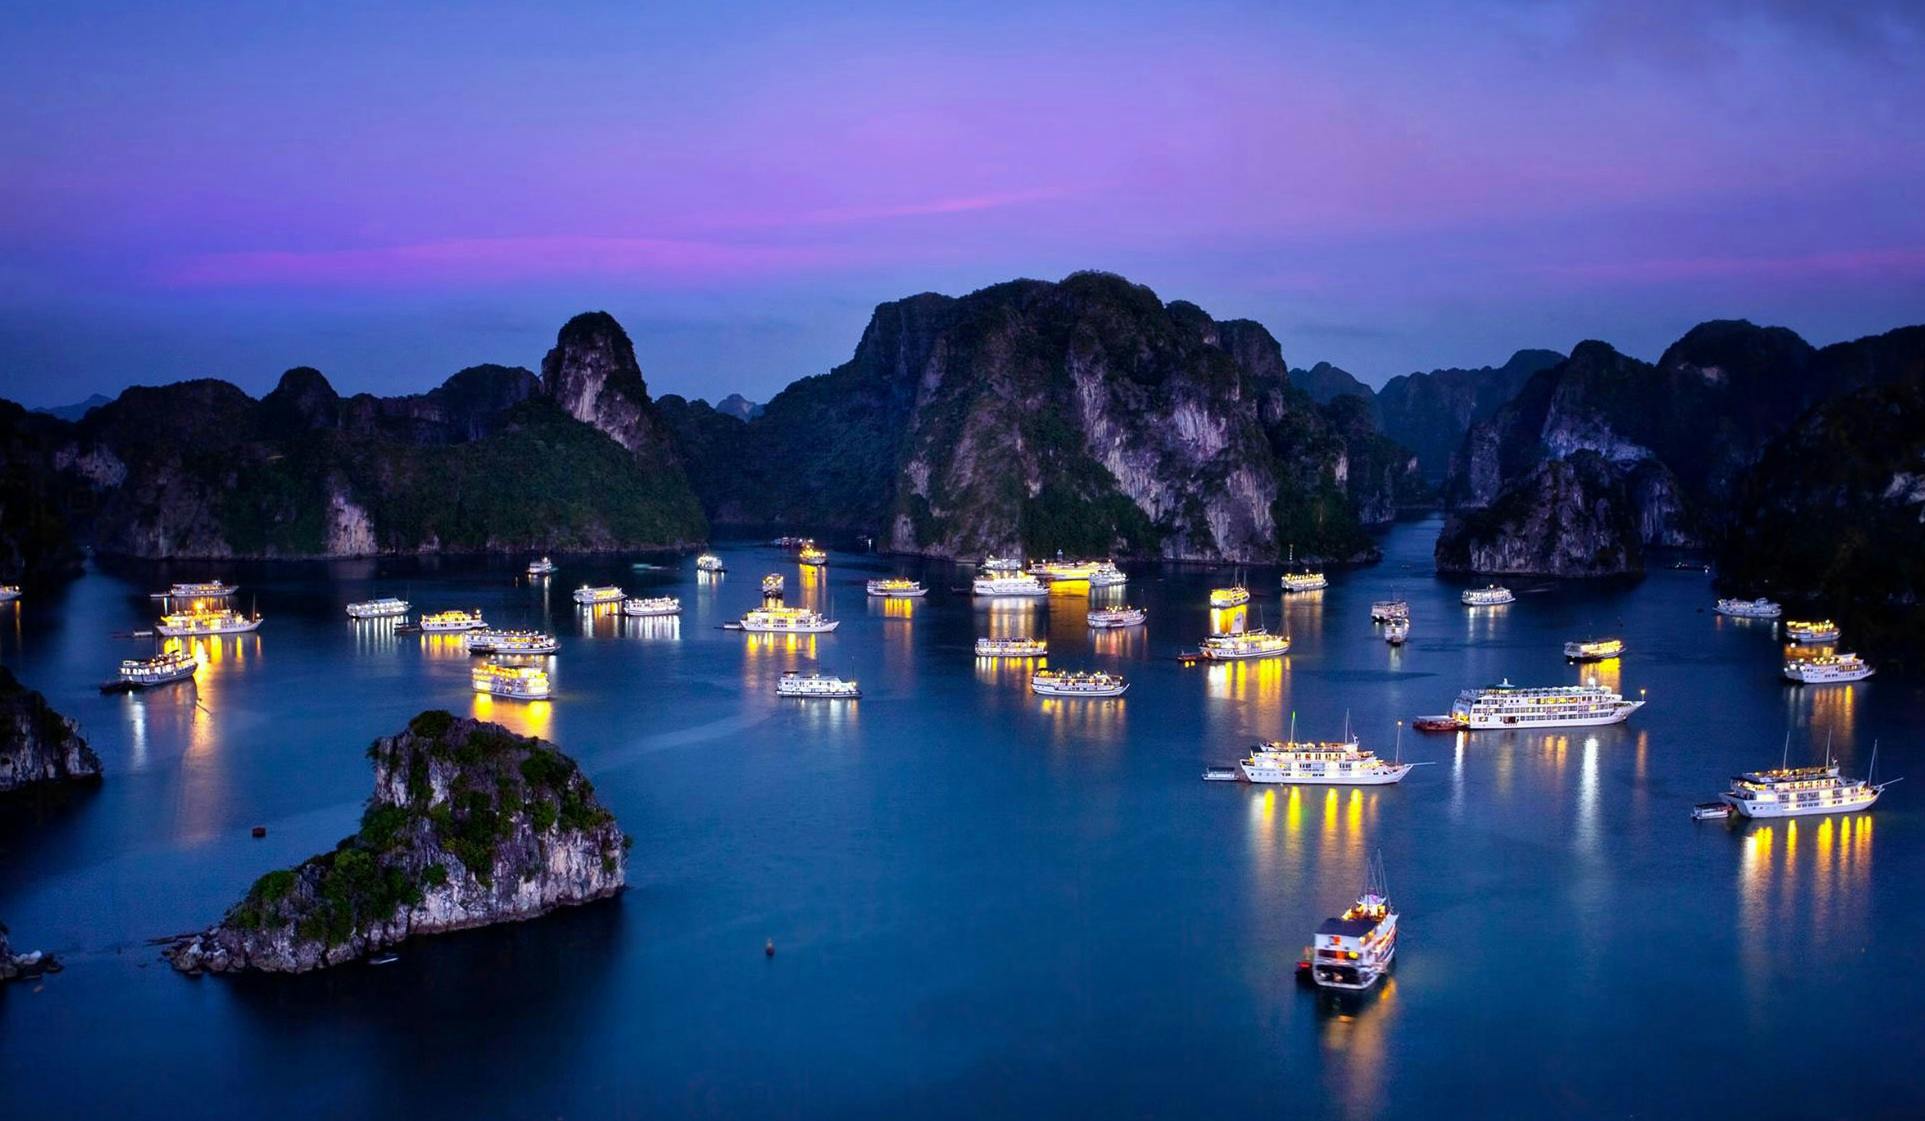 Private full-day trip from Hanoi to Halong Bay with boat cruise